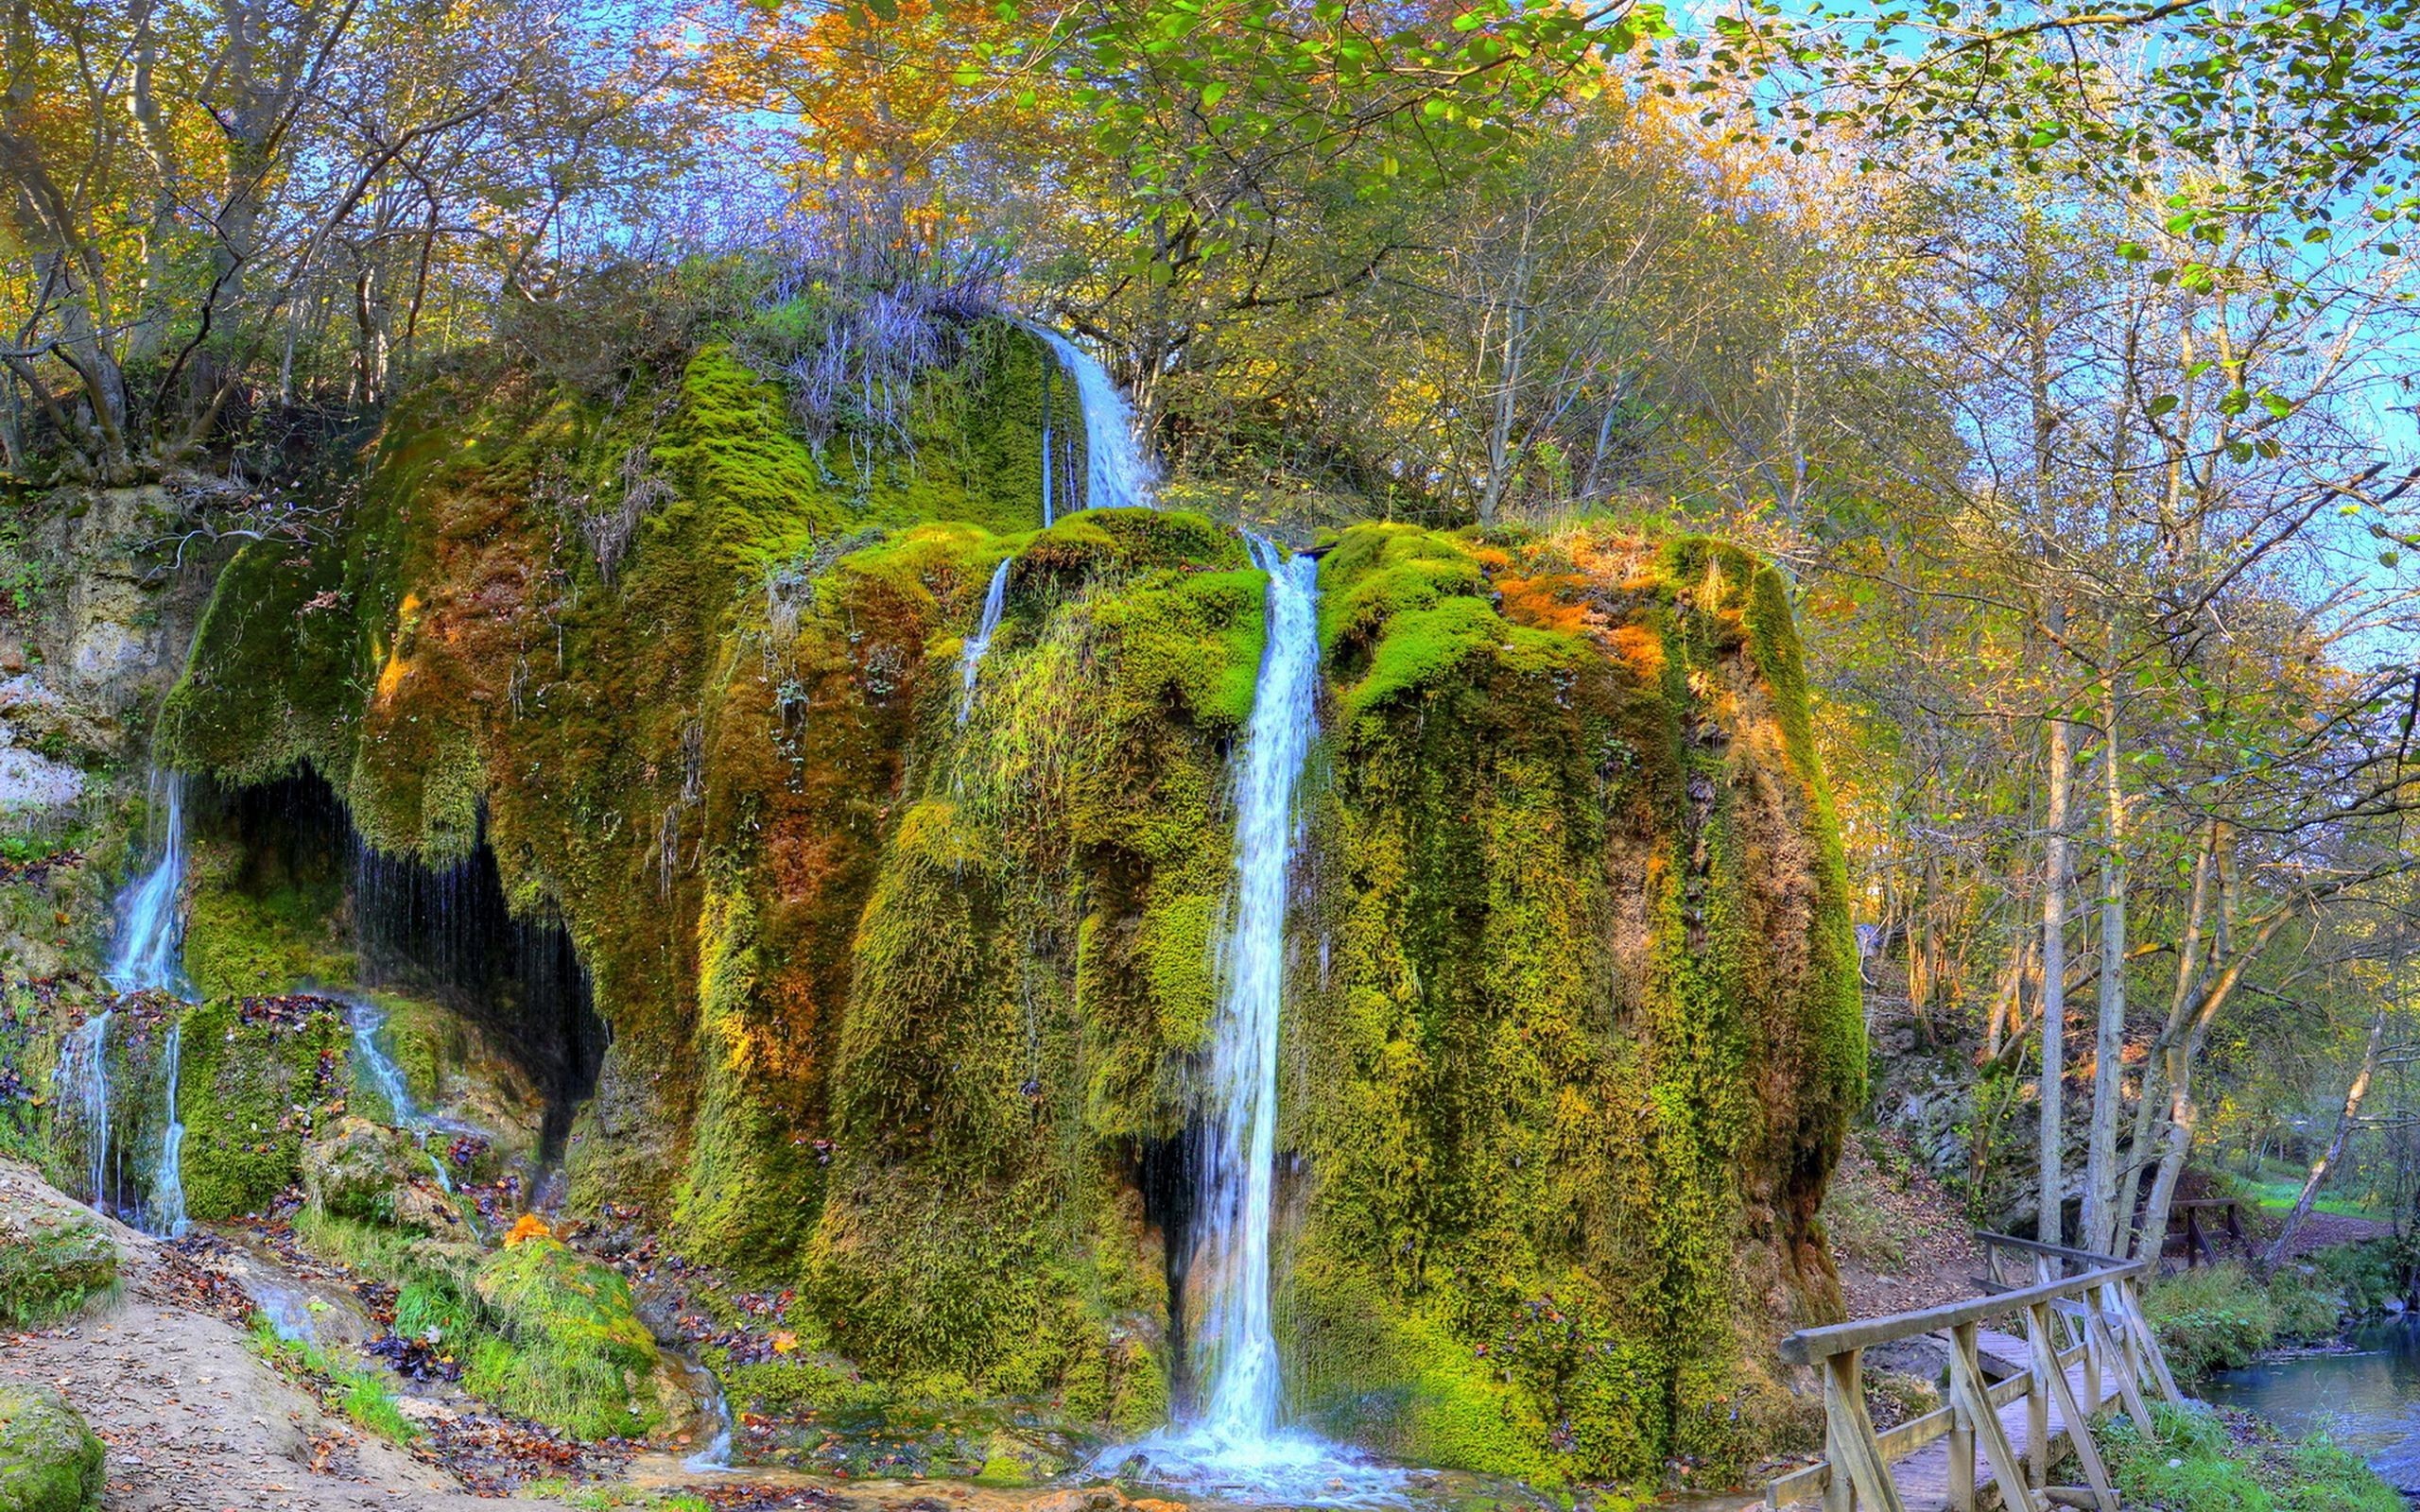 General 2560x1600 nature waterfall HDR rocks trees outdoors